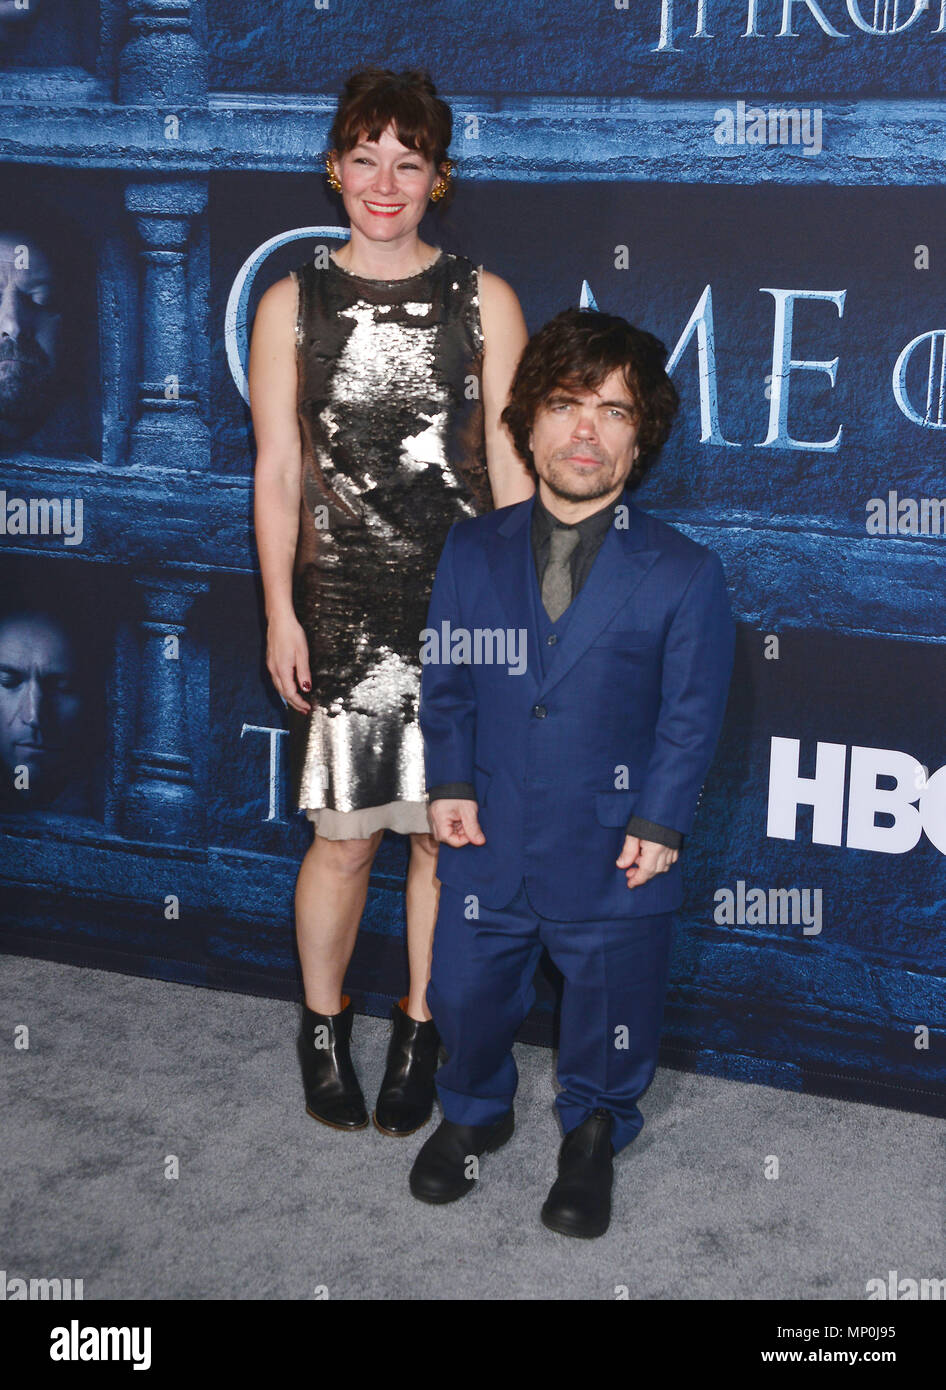 Peter Dinklage, Erica Schmidt 246 arriving at the Game of Thrones at the TCL Chinese Theatre in Los Angeles. April 10, 2016.Peter Dinklage, Erica Schmidt 246 ------------- Red Carpet Event, Vertical, USA, Film Industry, Celebrities,  Photography, Bestof, Arts Culture and Entertainment, Topix Celebrities fashion /  Vertical, Best of, Event in Hollywood Life - California,  Red Carpet and backstage, USA, Film Industry, Celebrities,  movie celebrities, TV celebrities, Music celebrities, Photography, Bestof, Arts Culture and Entertainment,  Topix, vertical,  family from from the year , 2016, inquir Stock Photo